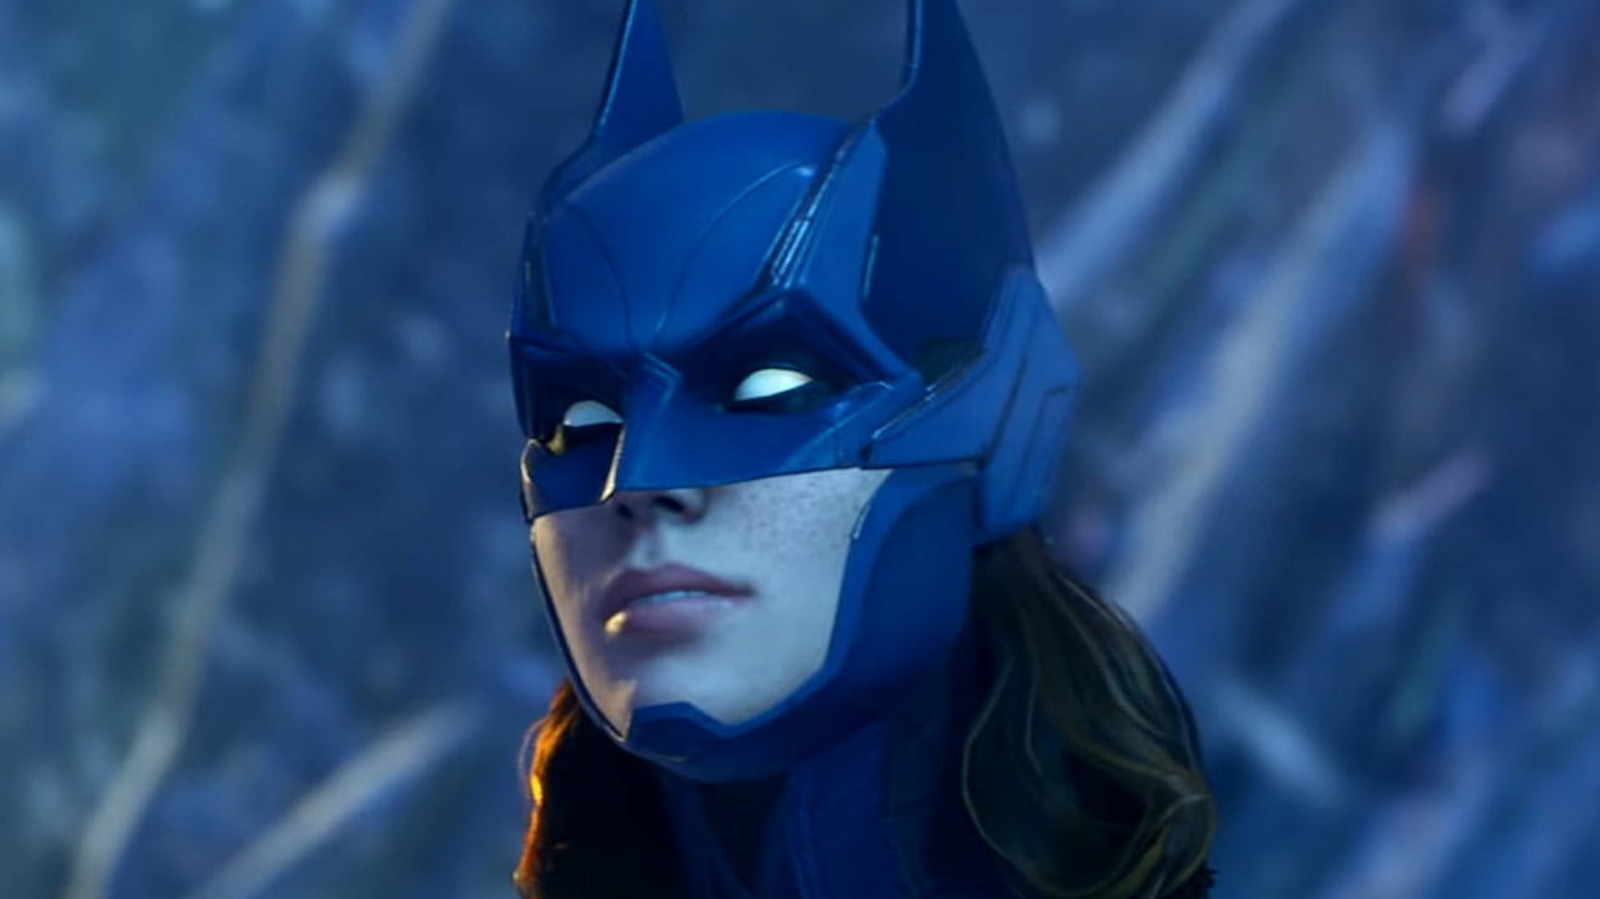 Gotham Knights gets a new gameplay trailer featuring Batgirl